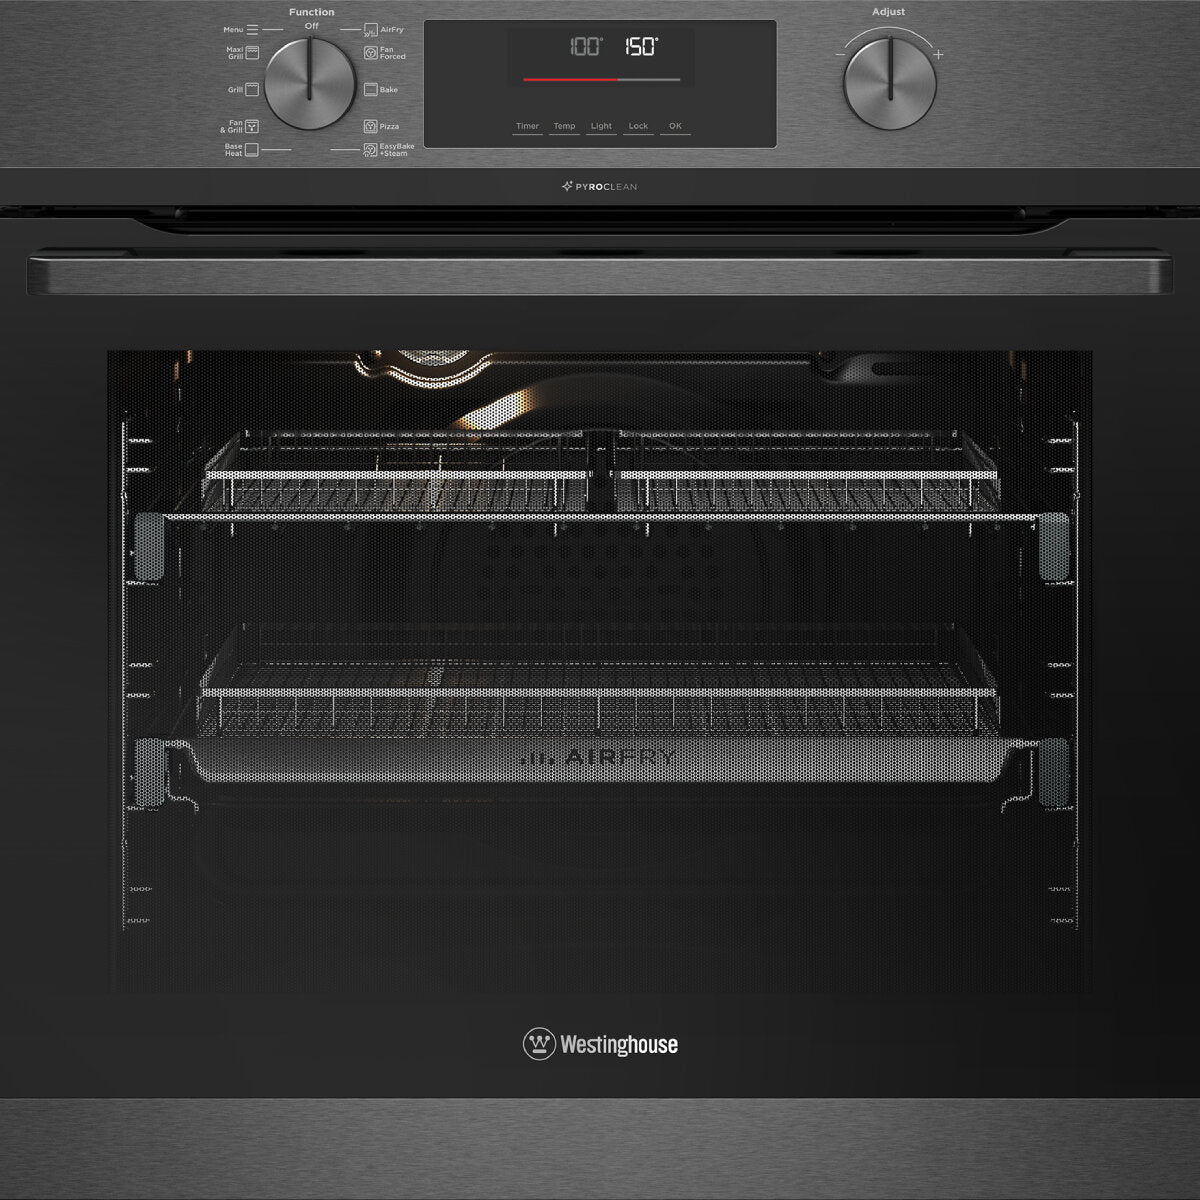 Westinghouse 60cm Dark Stainless Steel Pyroclean Oven with Airfry WVEP6717DD